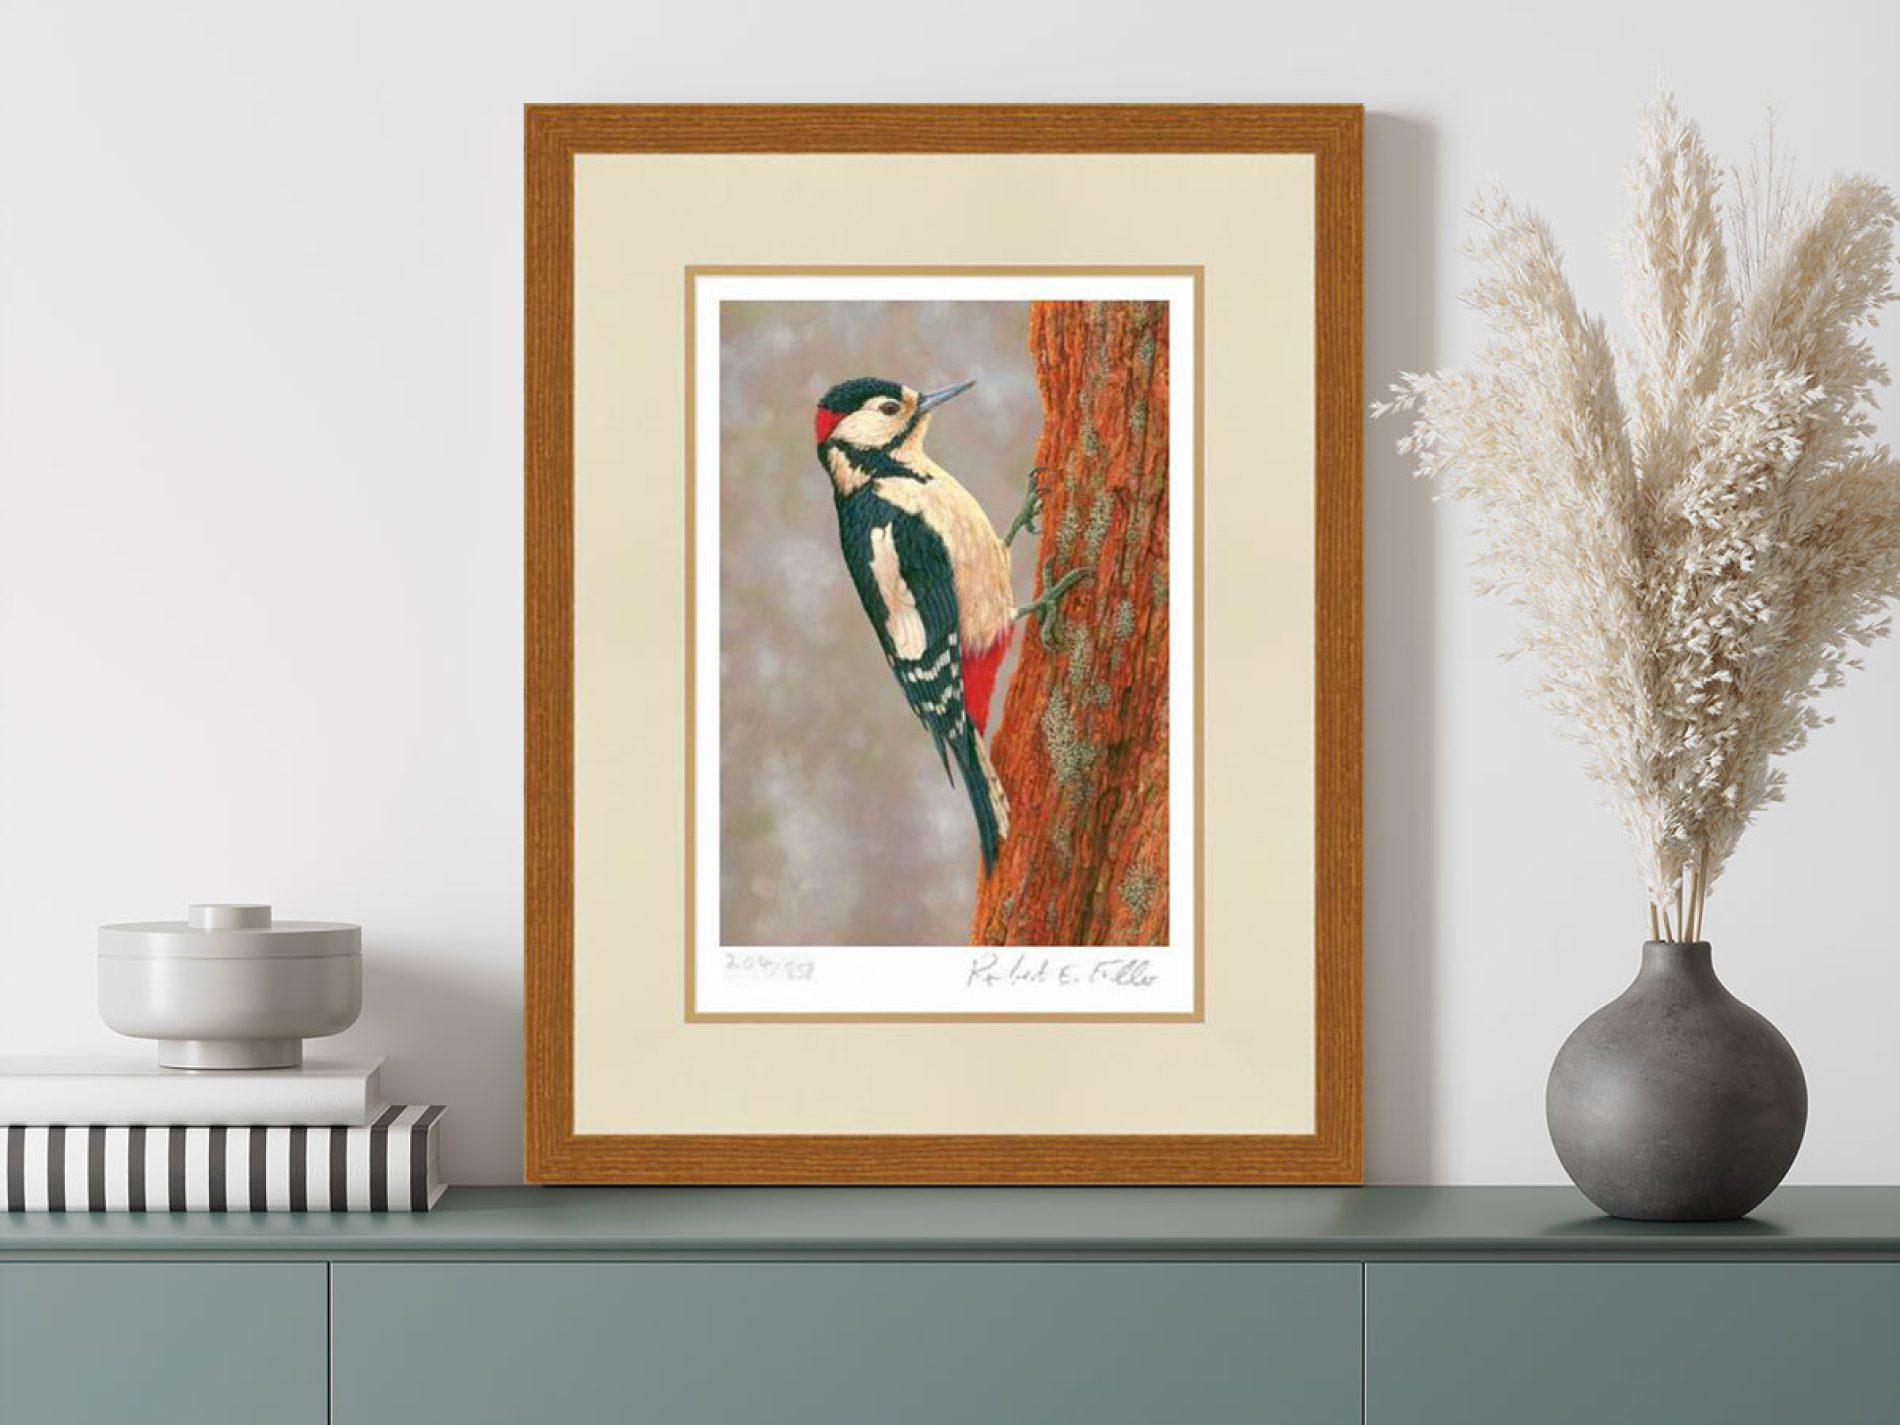 1200x900-woodpecker-fotherale-rustic-country-iStock-1249842623